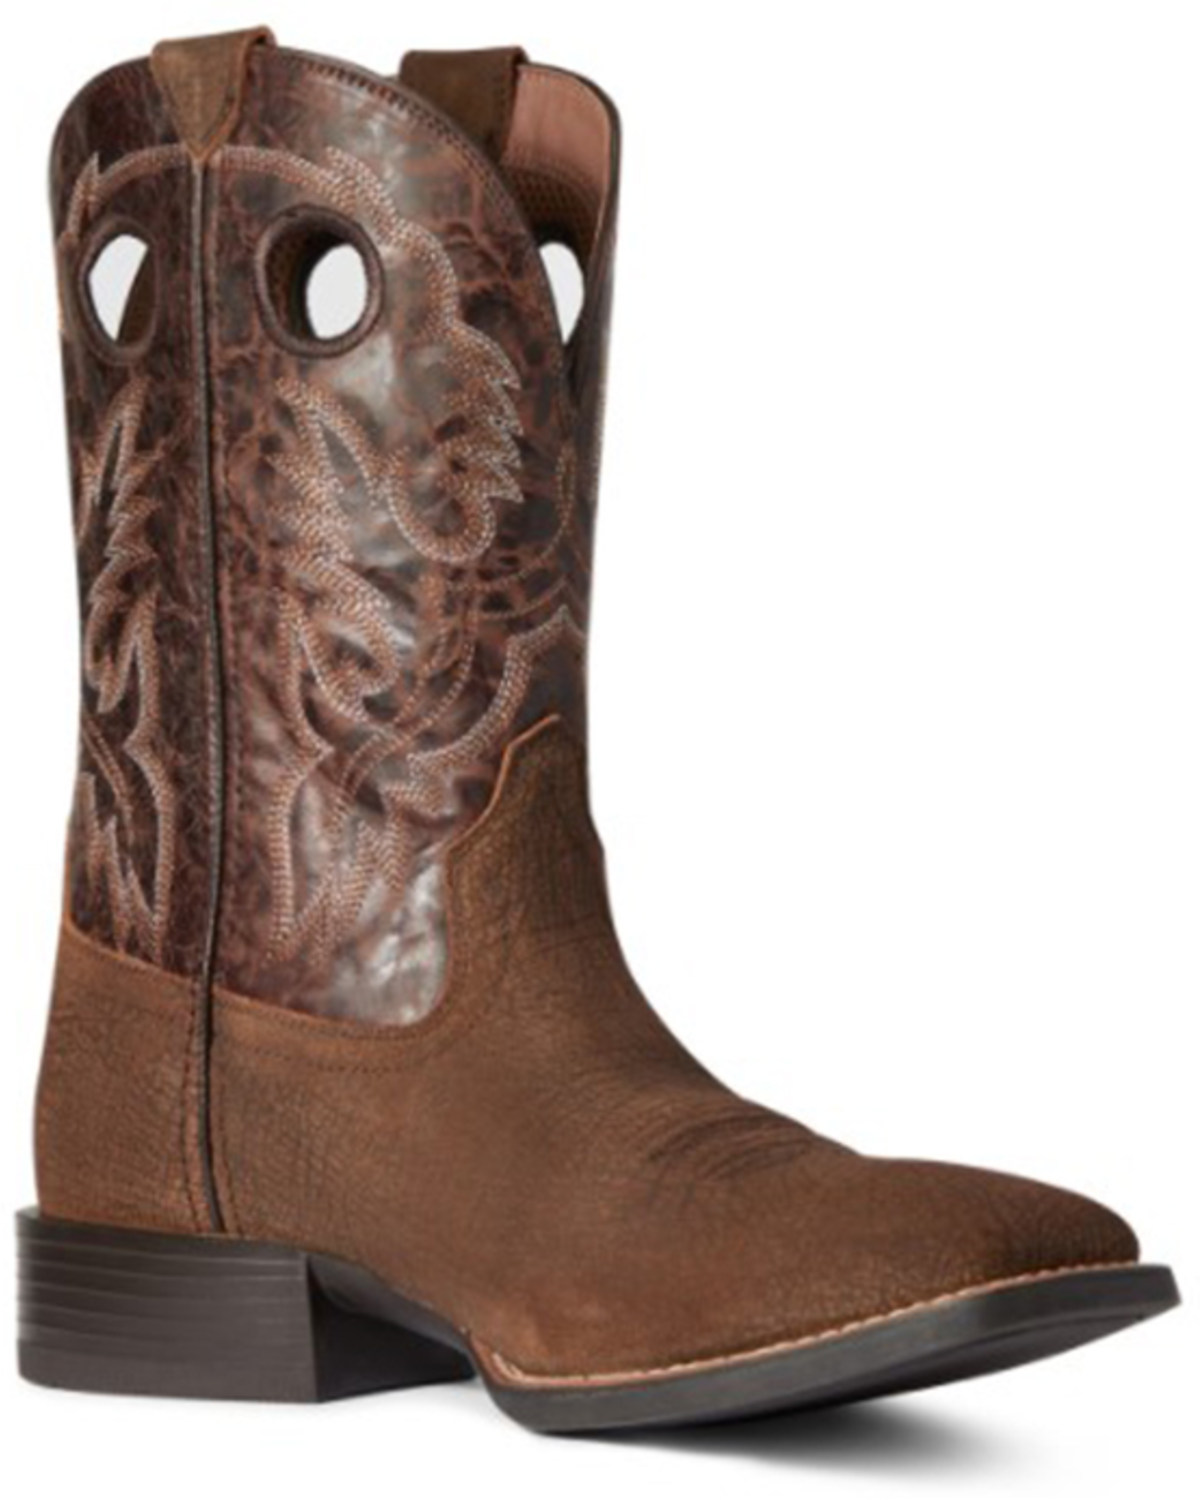 Ariat Men's Sport Buckout Western Performance Boots - Square Toe